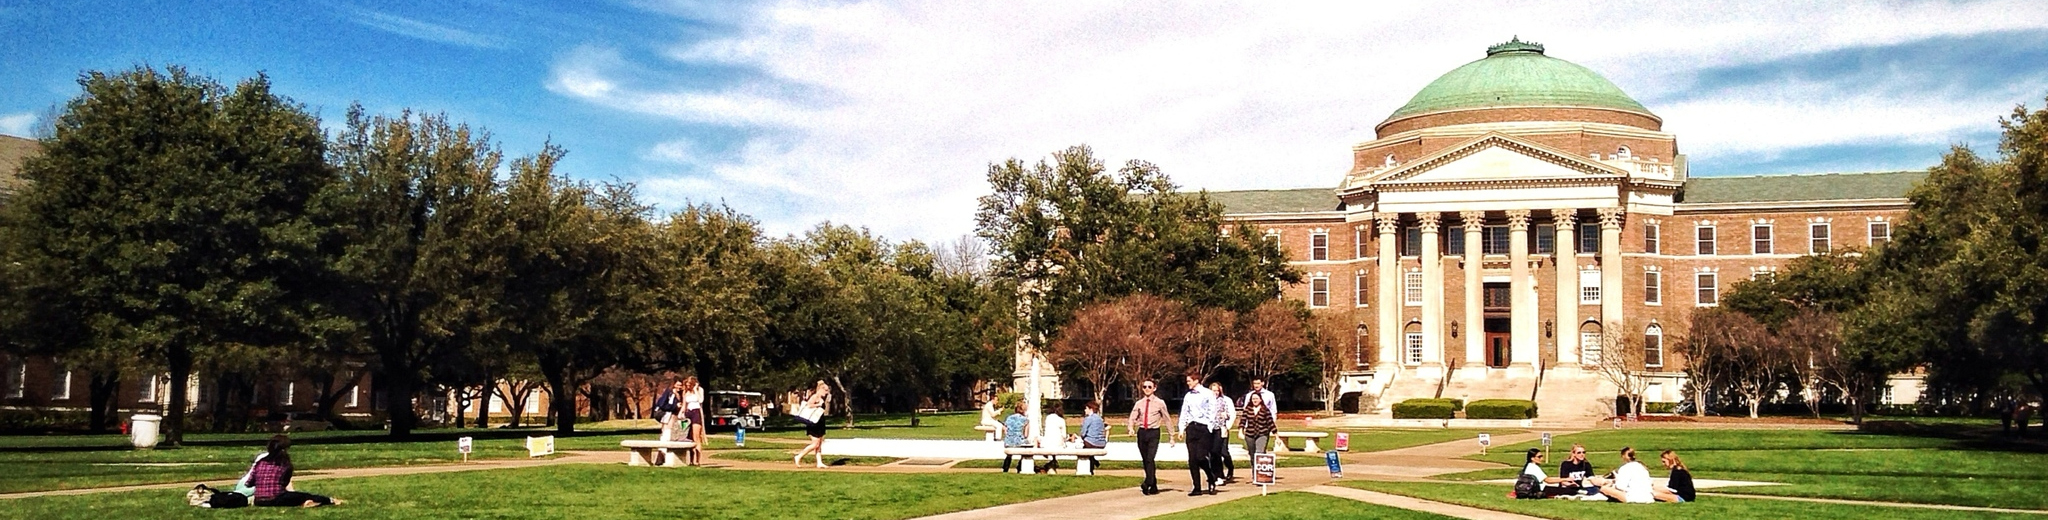 The front lawn of Dallas Hall featuring groups of people walking across the quad and sitting in the grass.